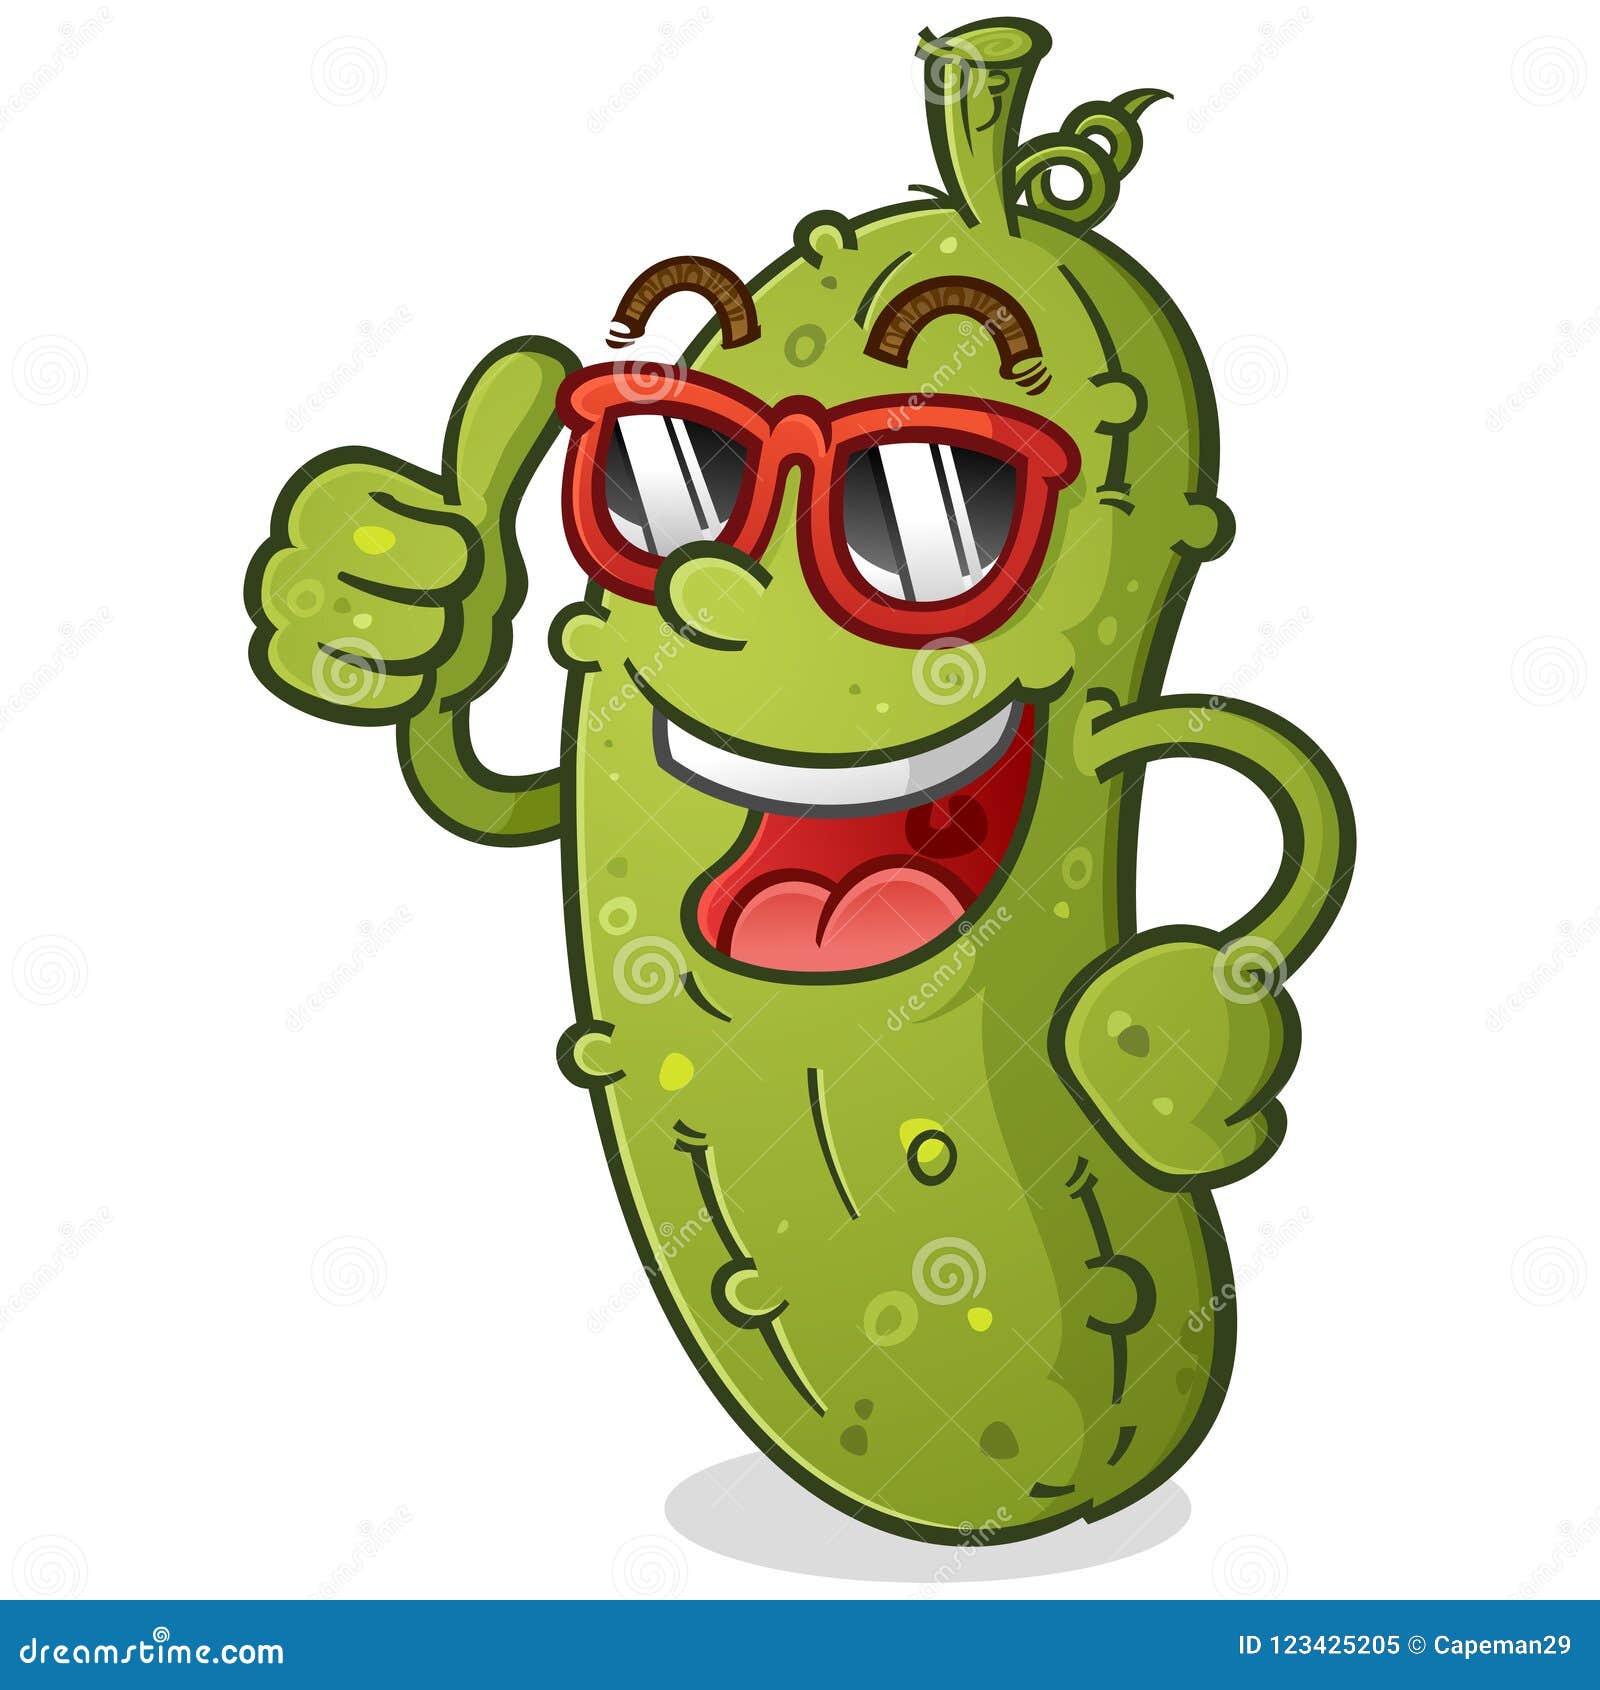 pickle cartoon character with attitude wearing sunglasses